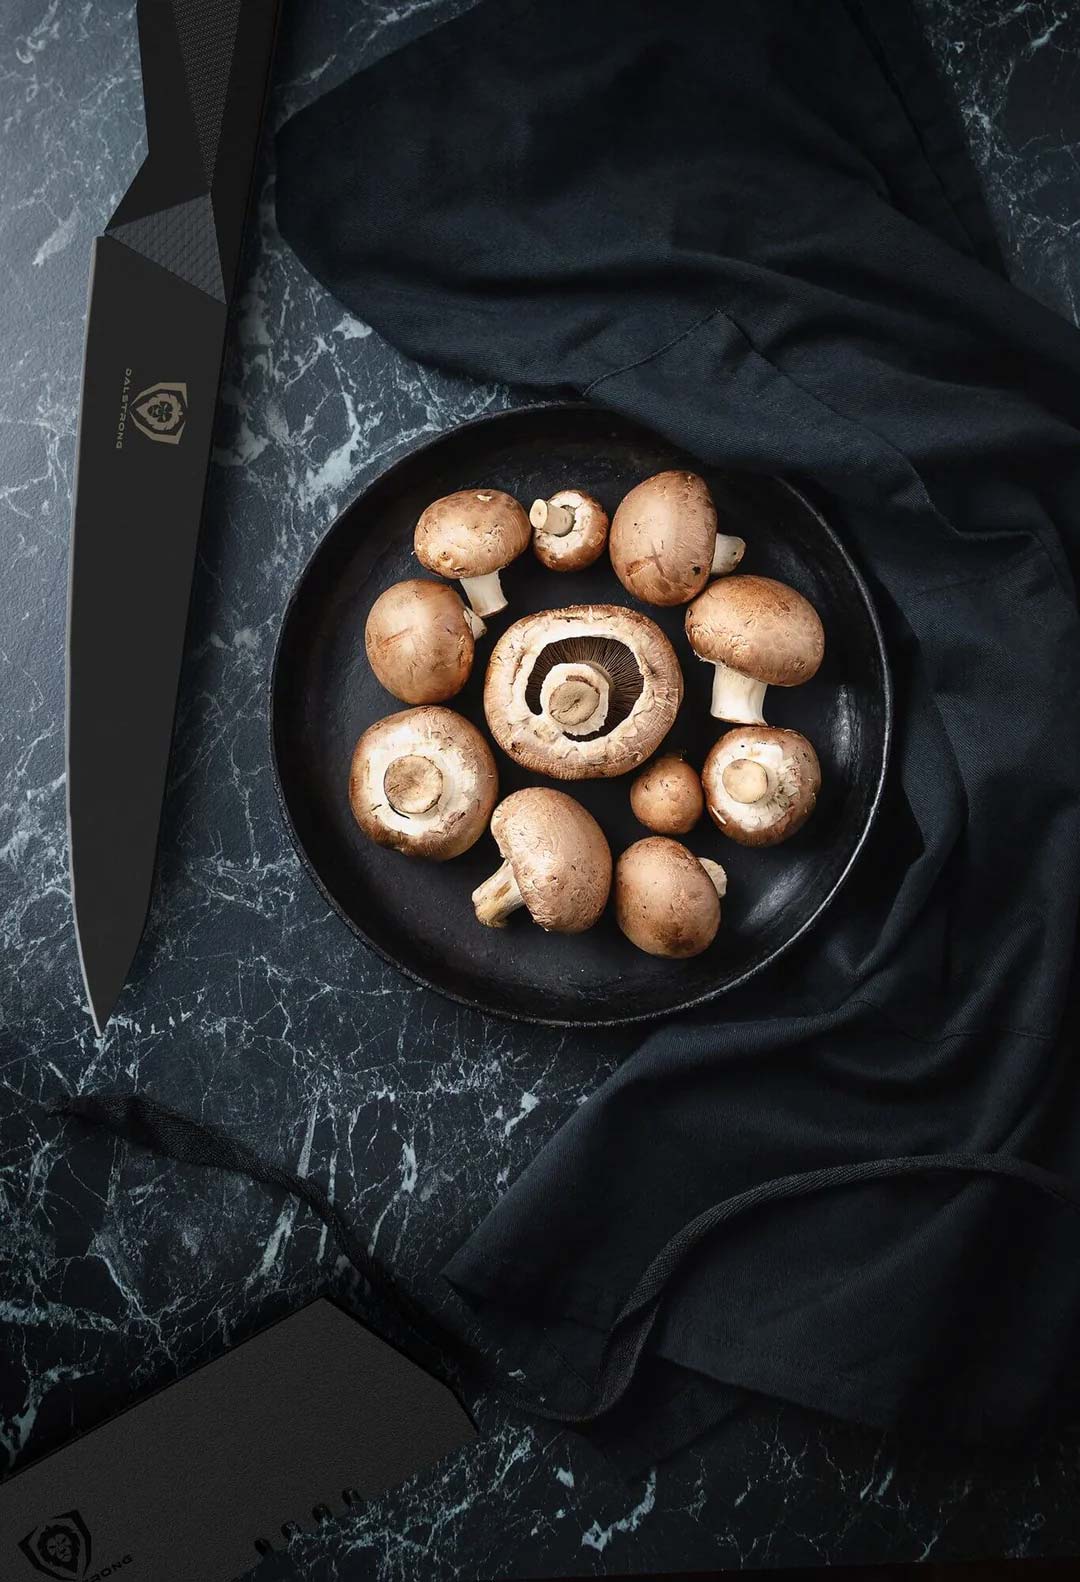 Dalstrong shadow black series 5.5 inch utility knife with black sheath beside some mushrooms.